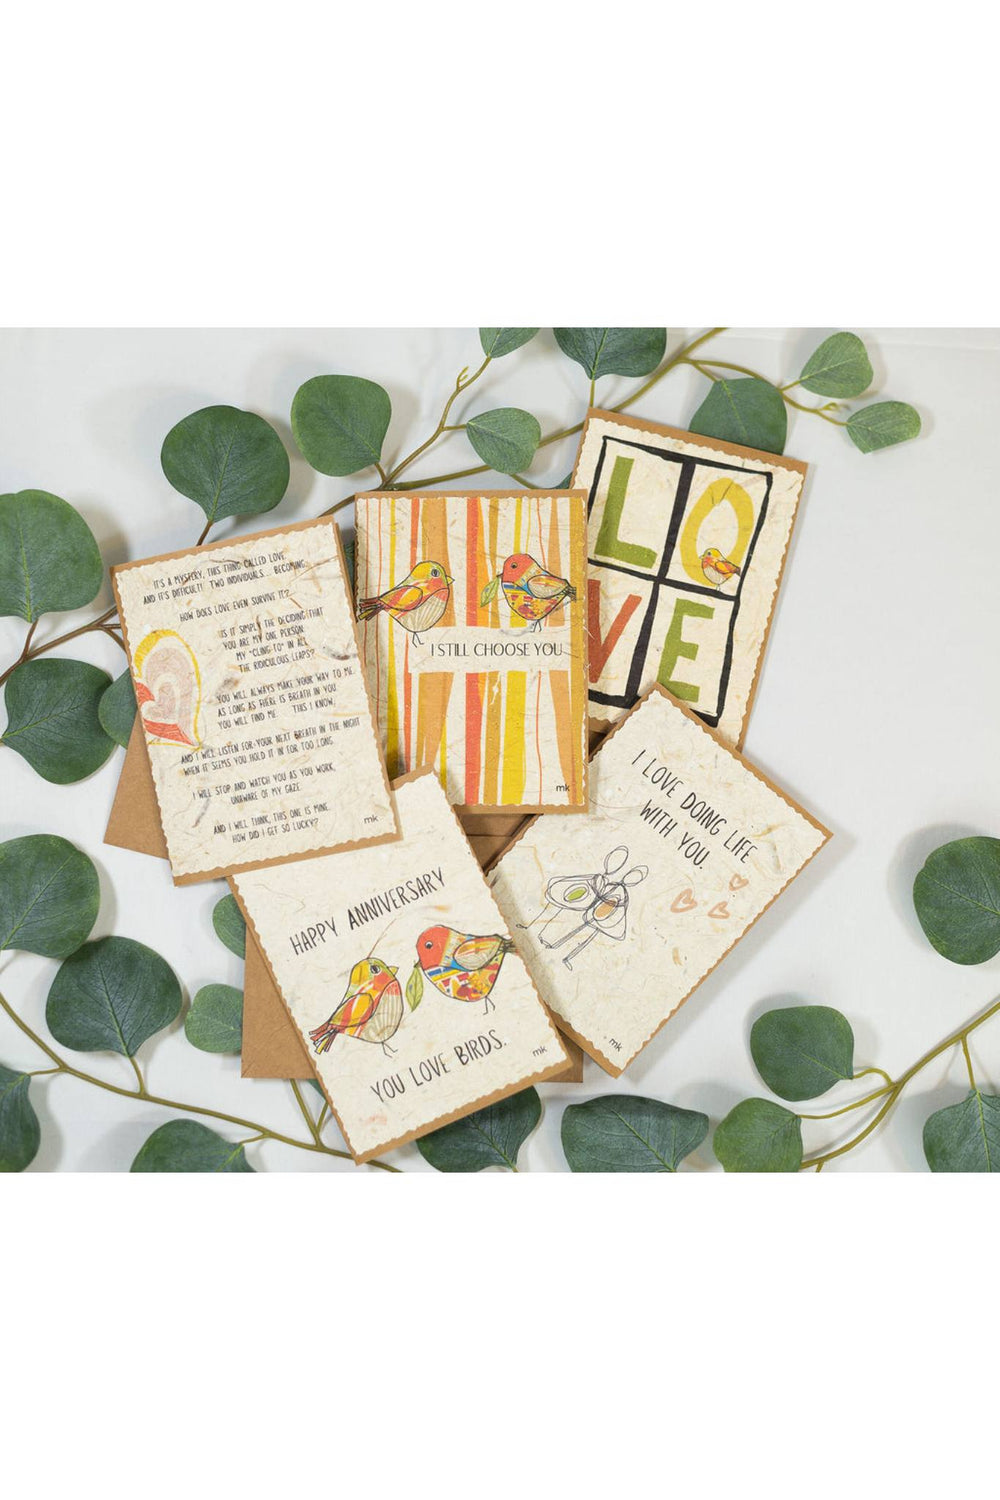 Banana Paper Anniversary/Love Cards by 2nd Story Goods